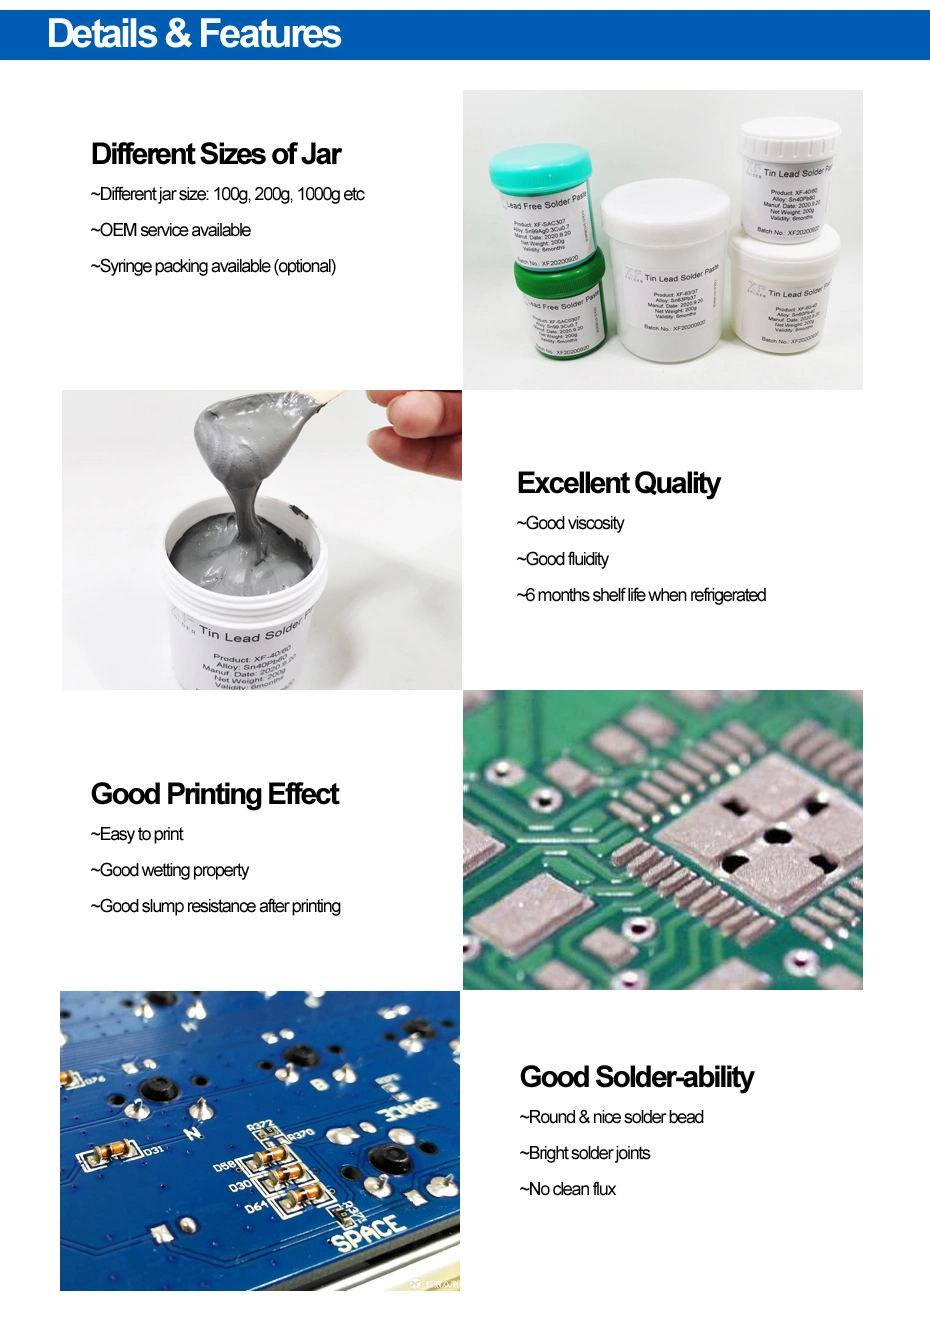 No Clean Sn40pb60 Leaded Tin Lead Solder Paste 40 60